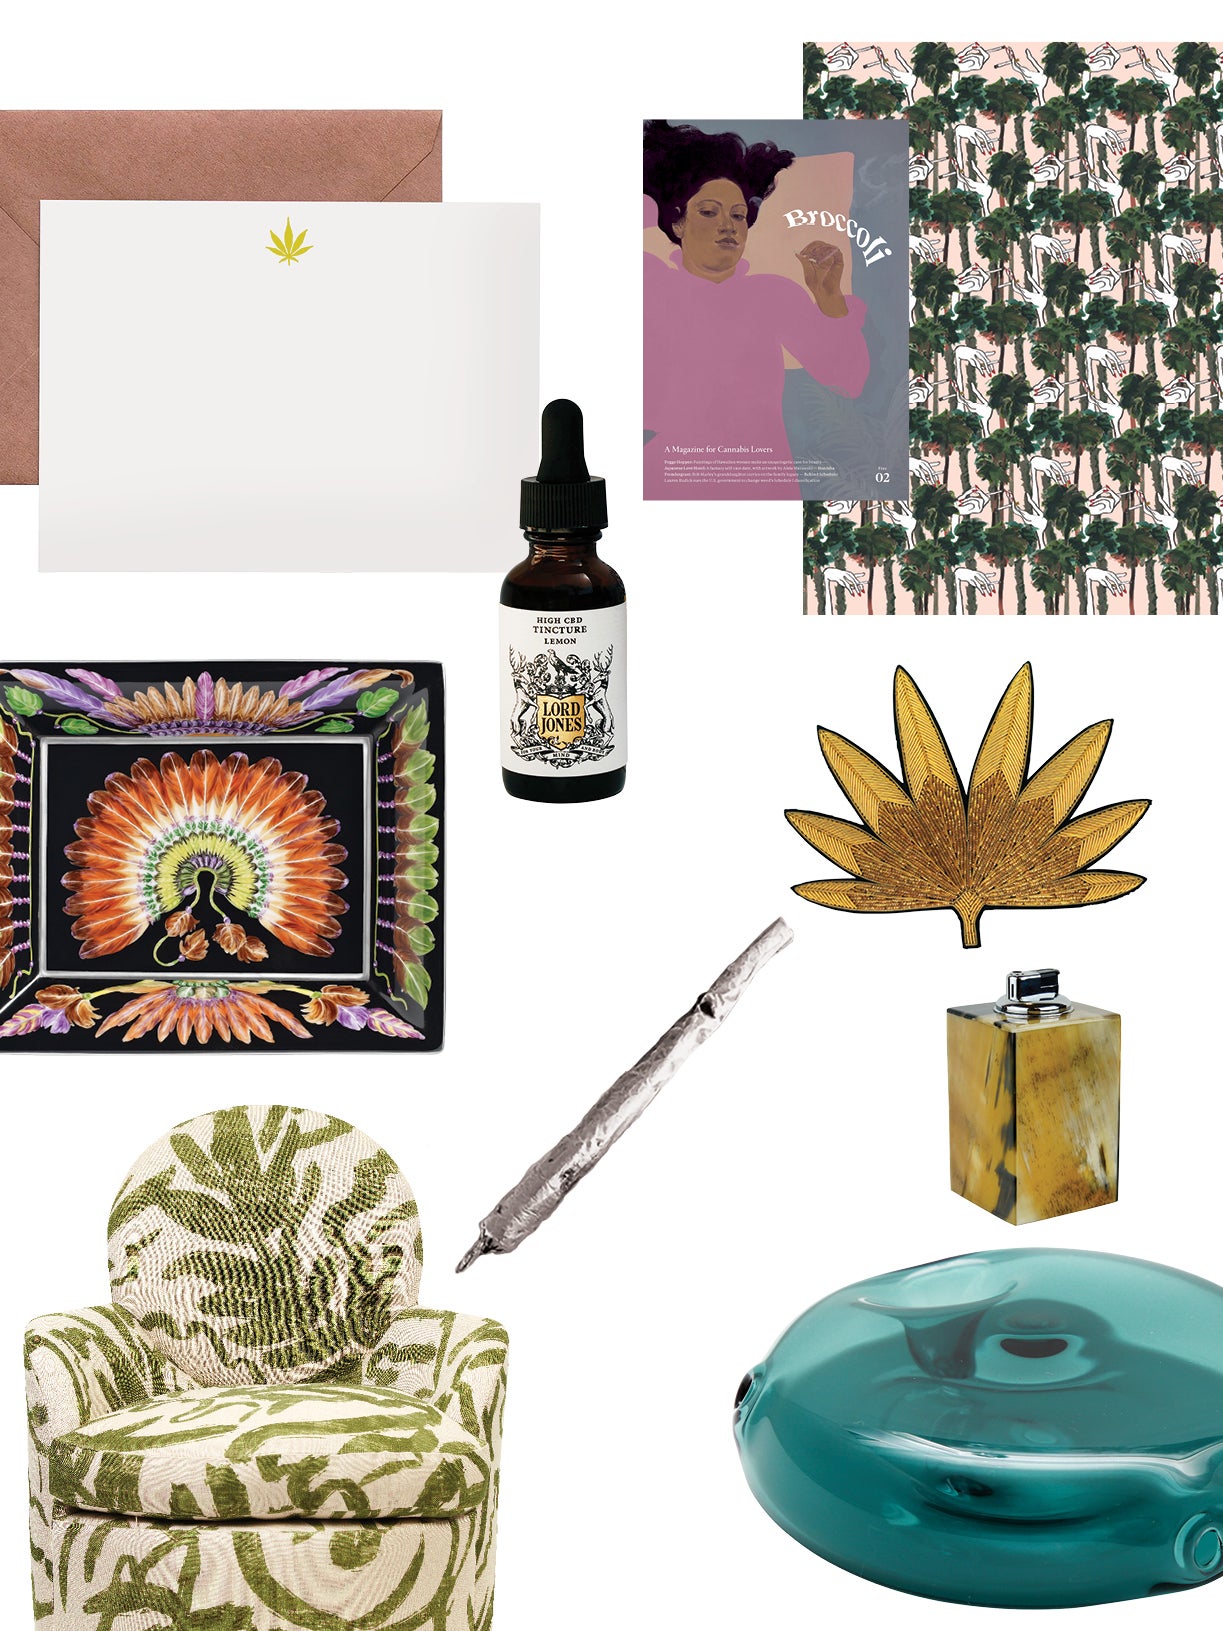 Live the High Life With These Cannabis-Inspired Home Goods